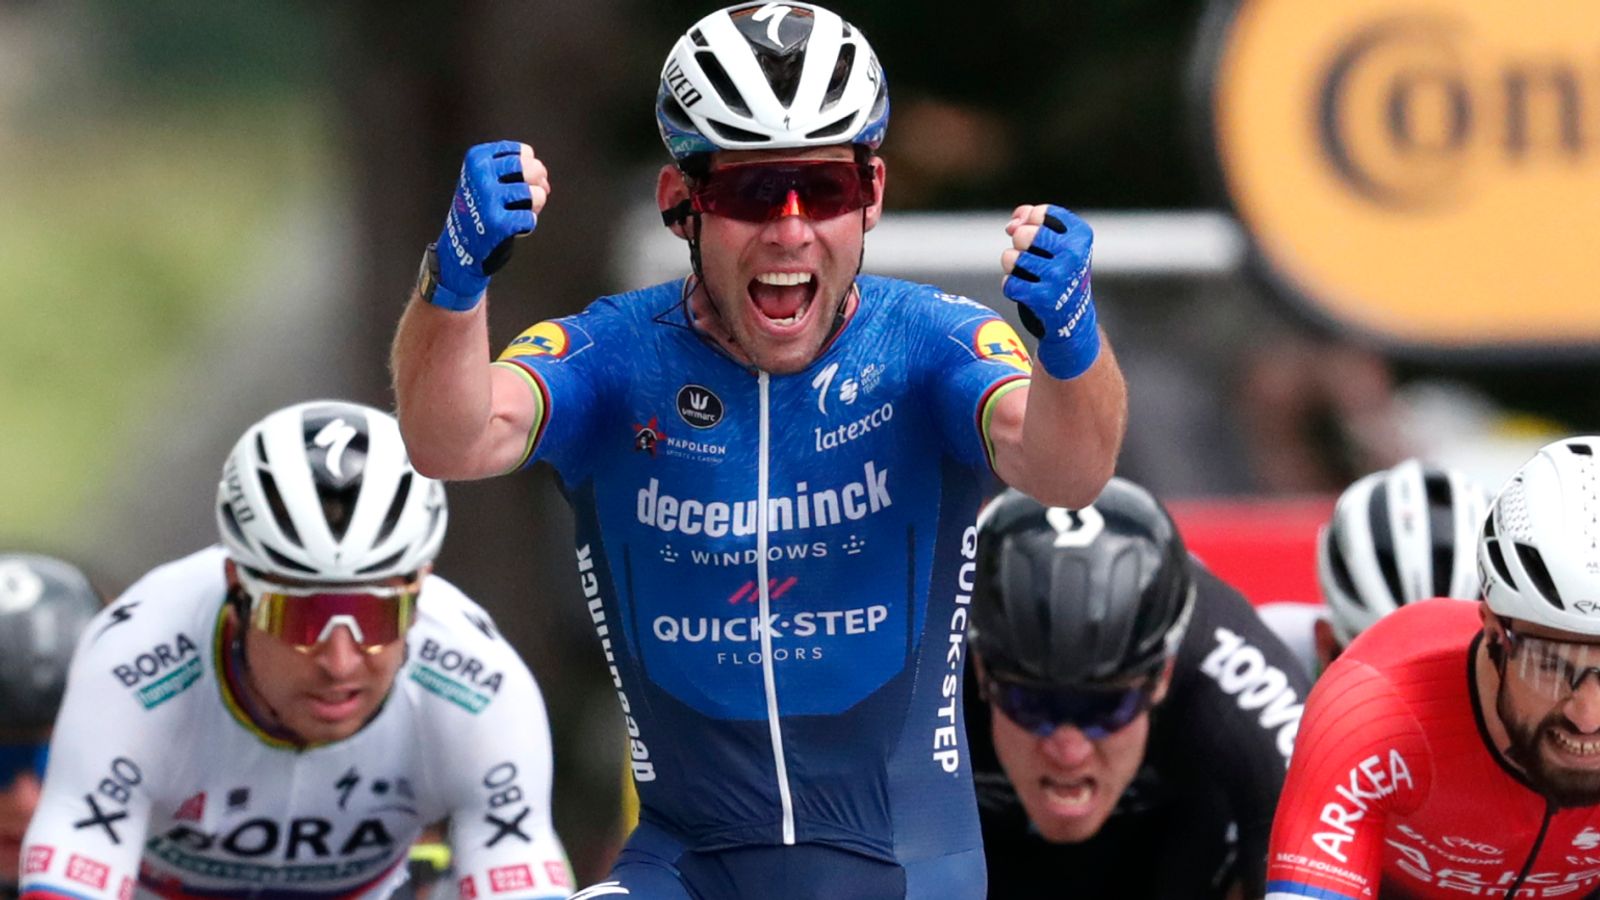 Tour de France Mark Cavendish wins fourth stage with emotional victory